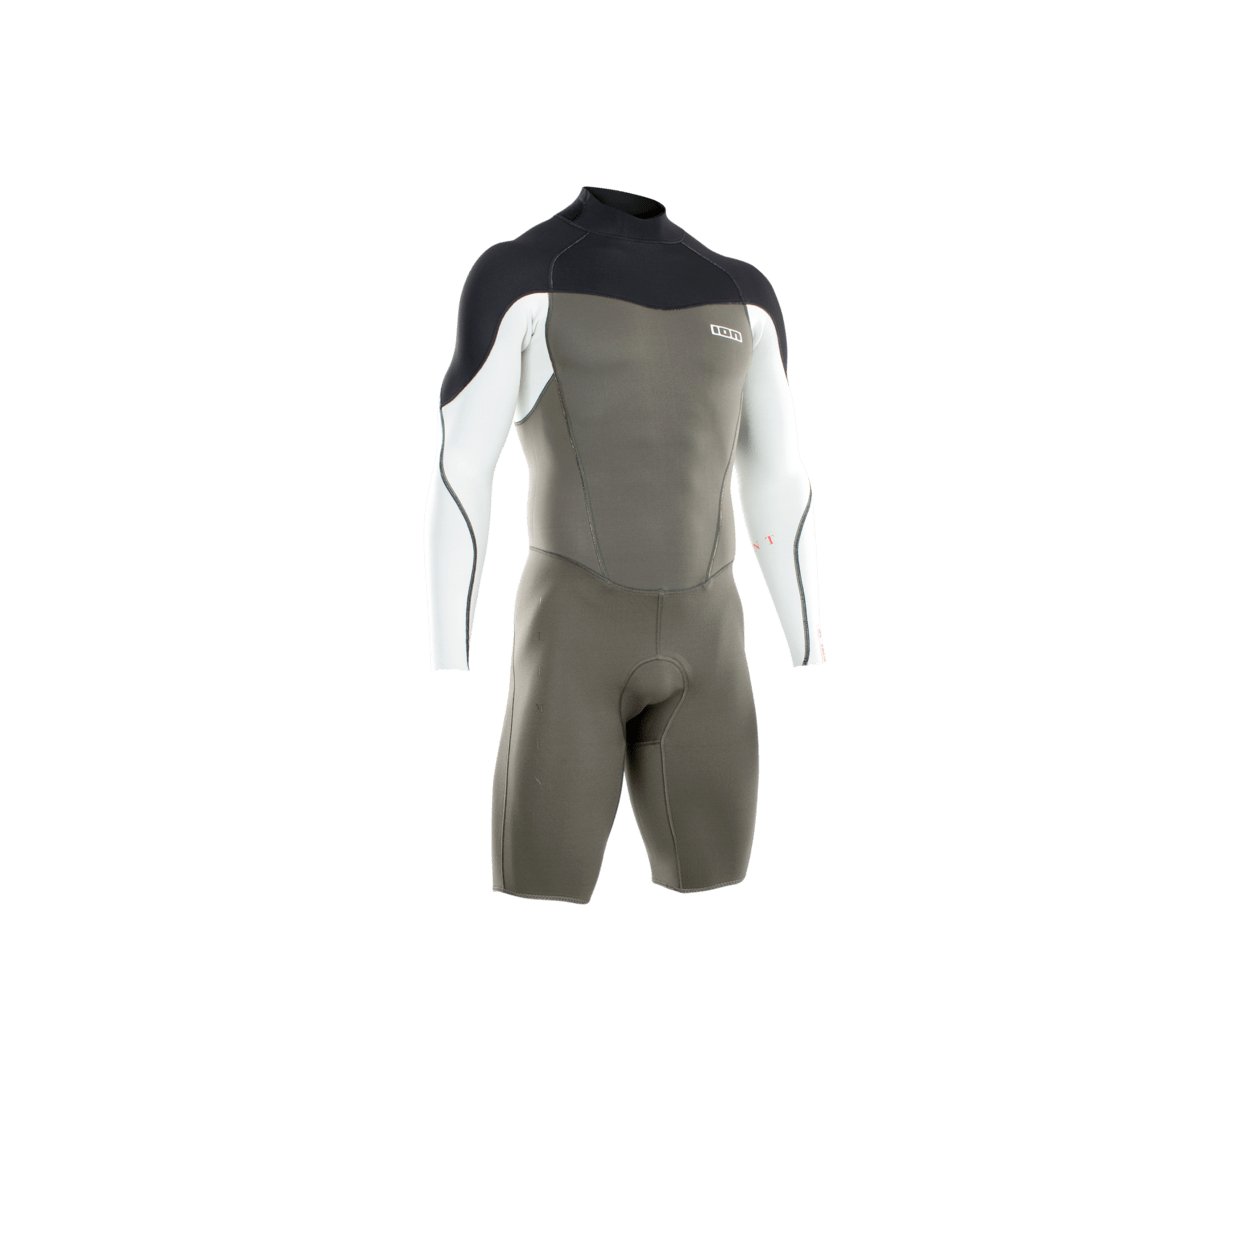 ION Men Wetsuit Element 2/2 Shorty Longsleeve Back Zip 2022 - Worthing Watersports - 9008415951574 - Wetsuits - ION Water